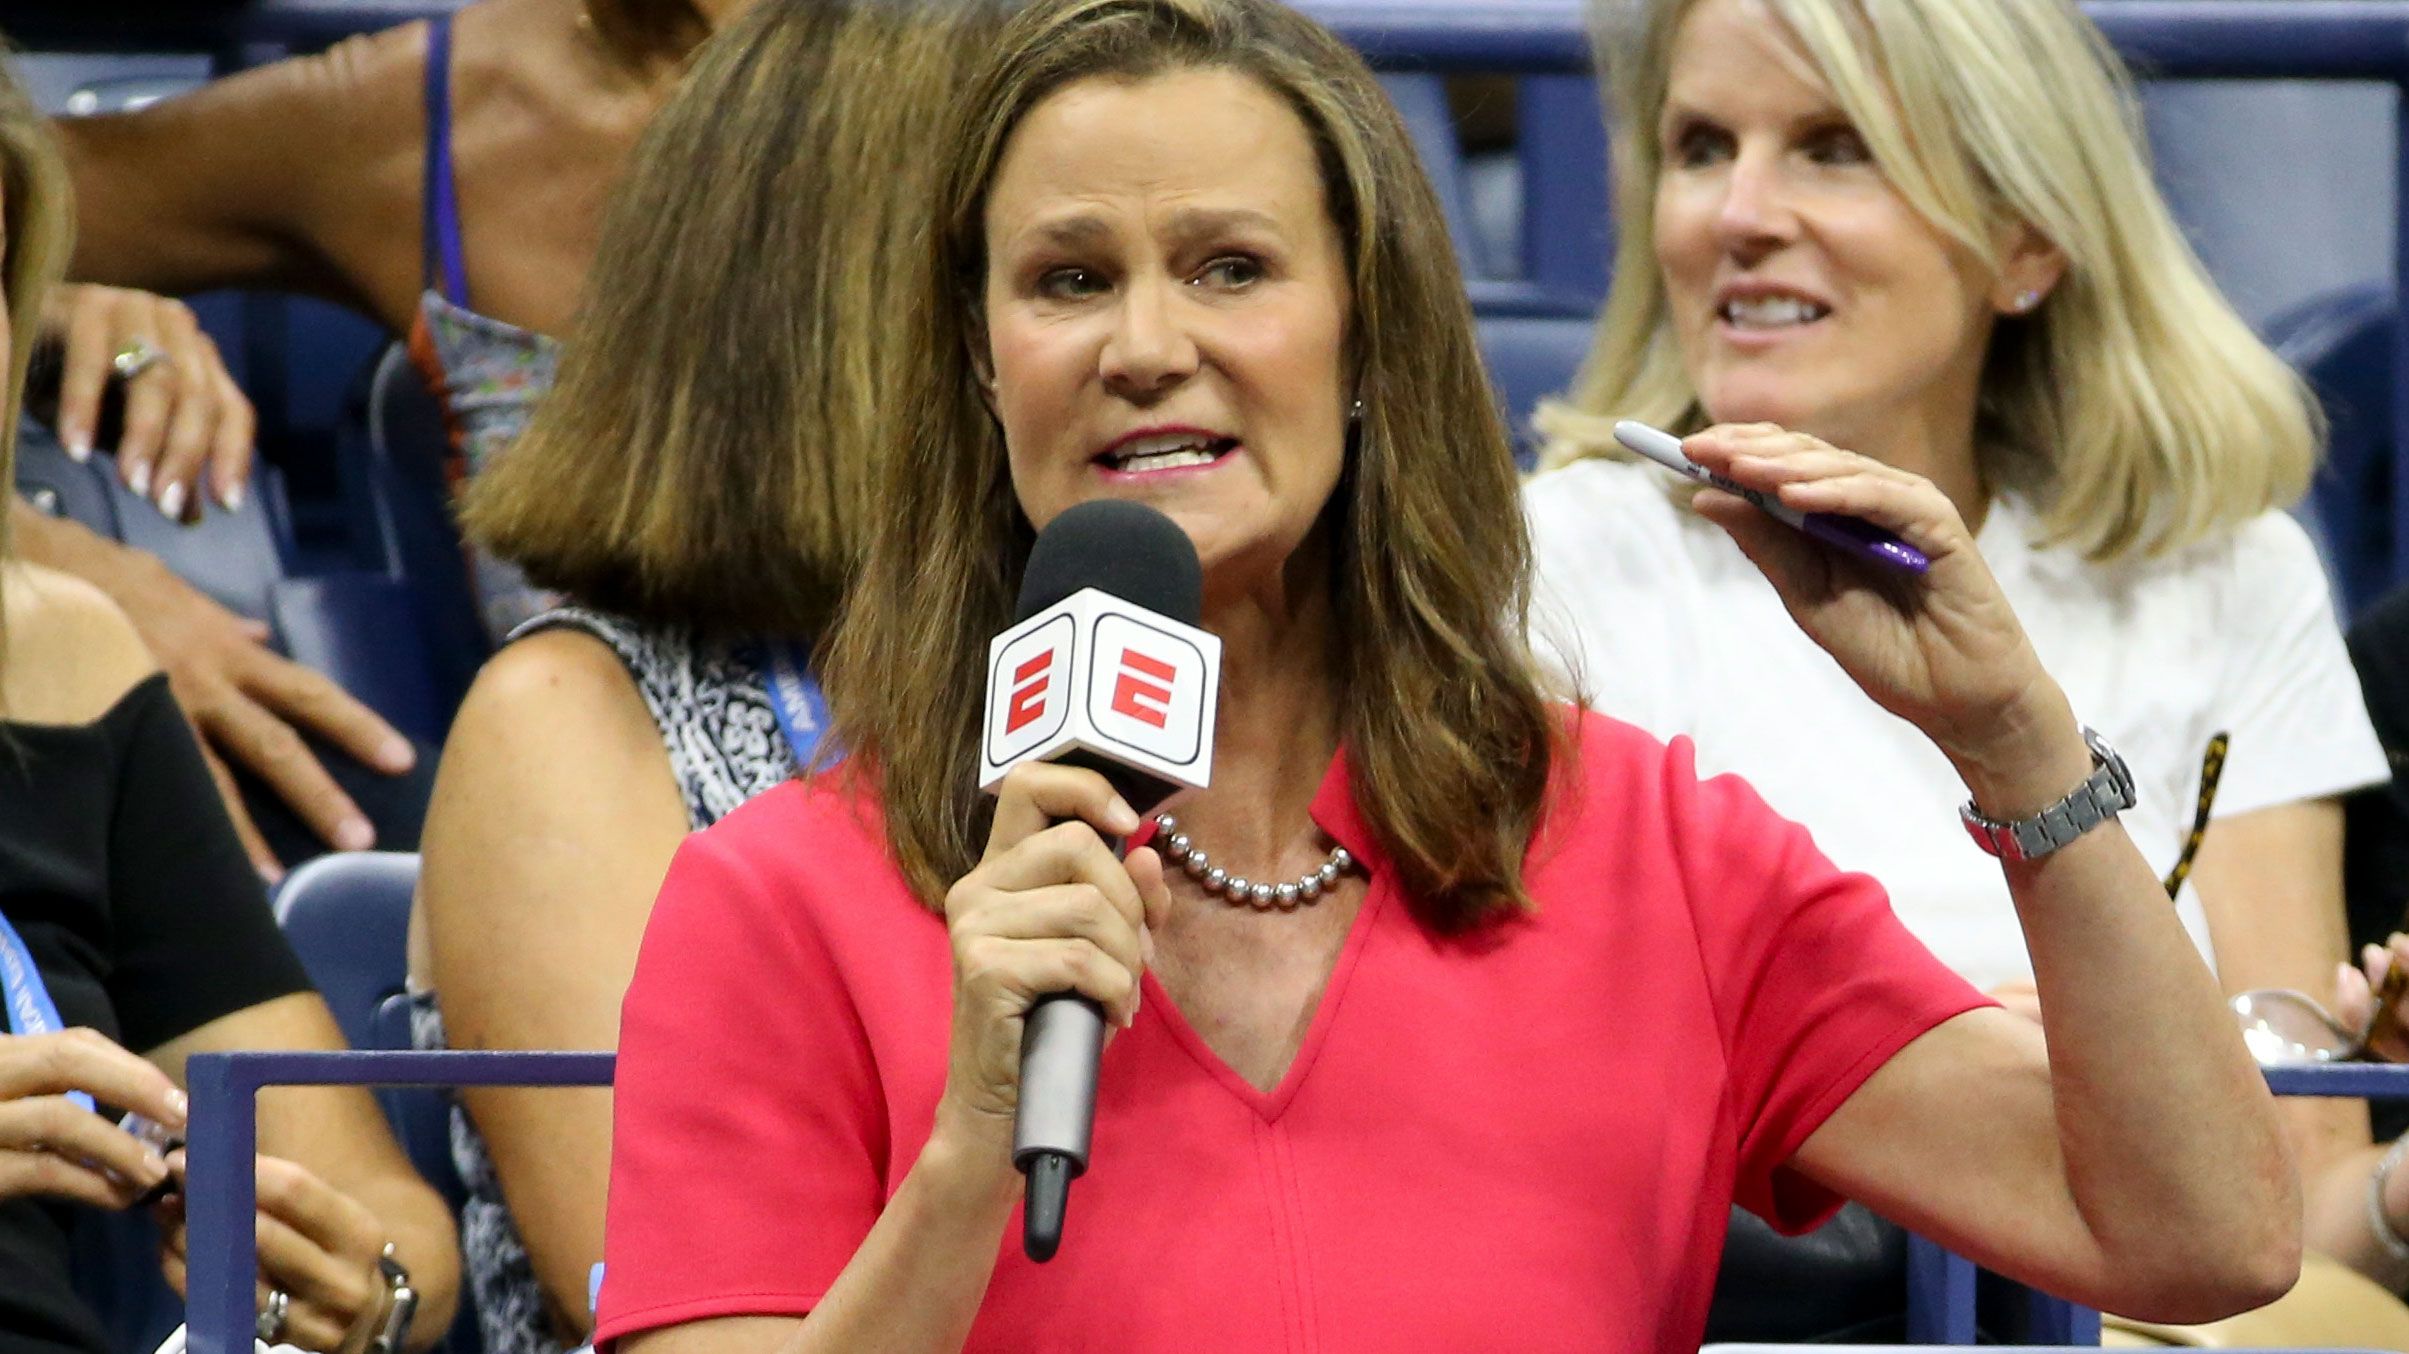 Tennis legend Pam Shriver reveals 'damaging' affair with coach that started when she was 17